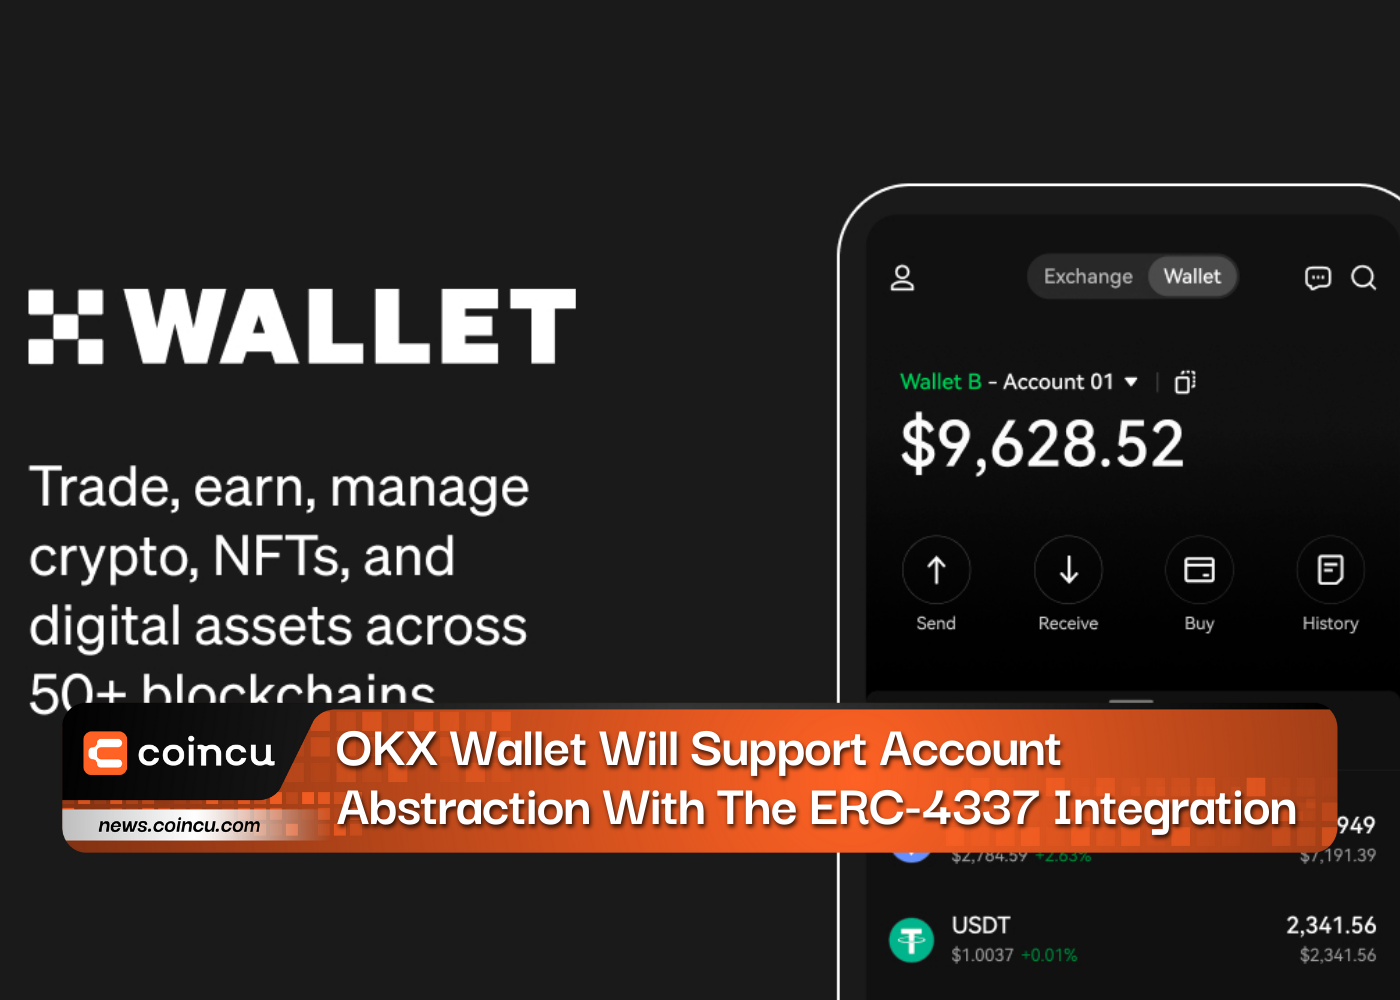 OKX Wallet Will Support Account Abstraction With The ERC-4337 Integration